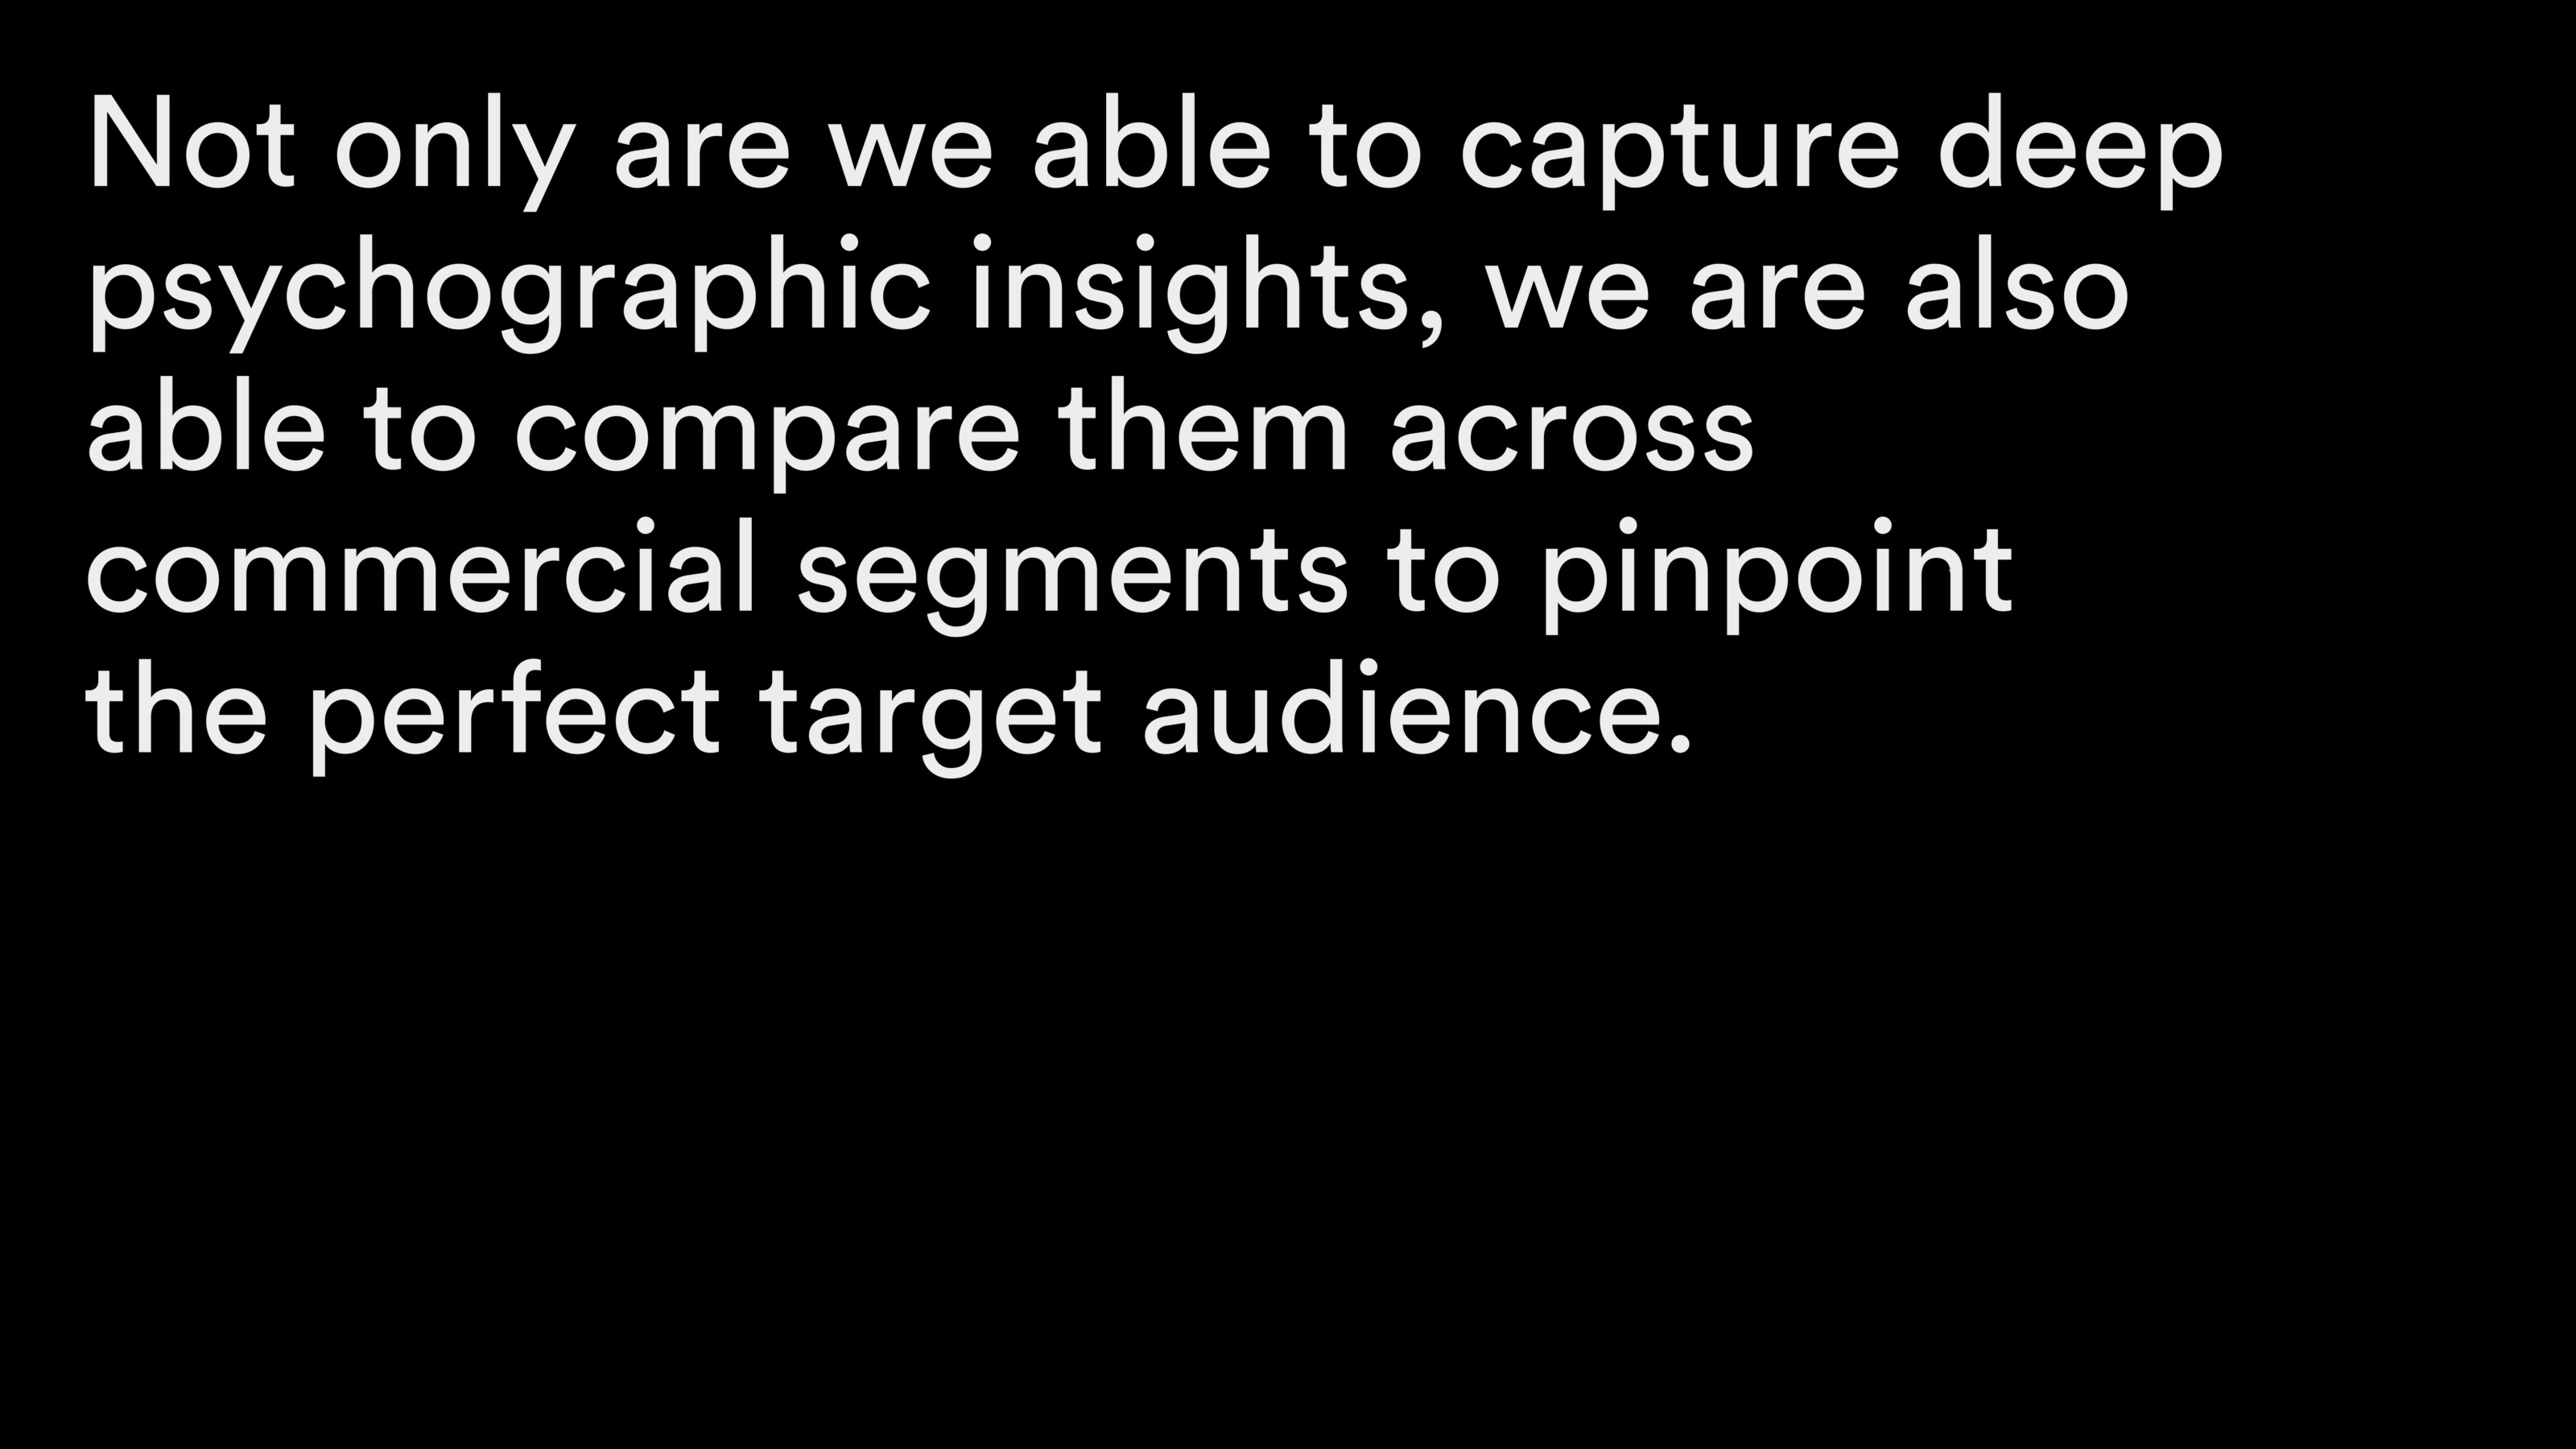 Not only are we able to capture deep psychographic insights, we are also able to compare them across commercial segments to pinpoint the perfect target audience.